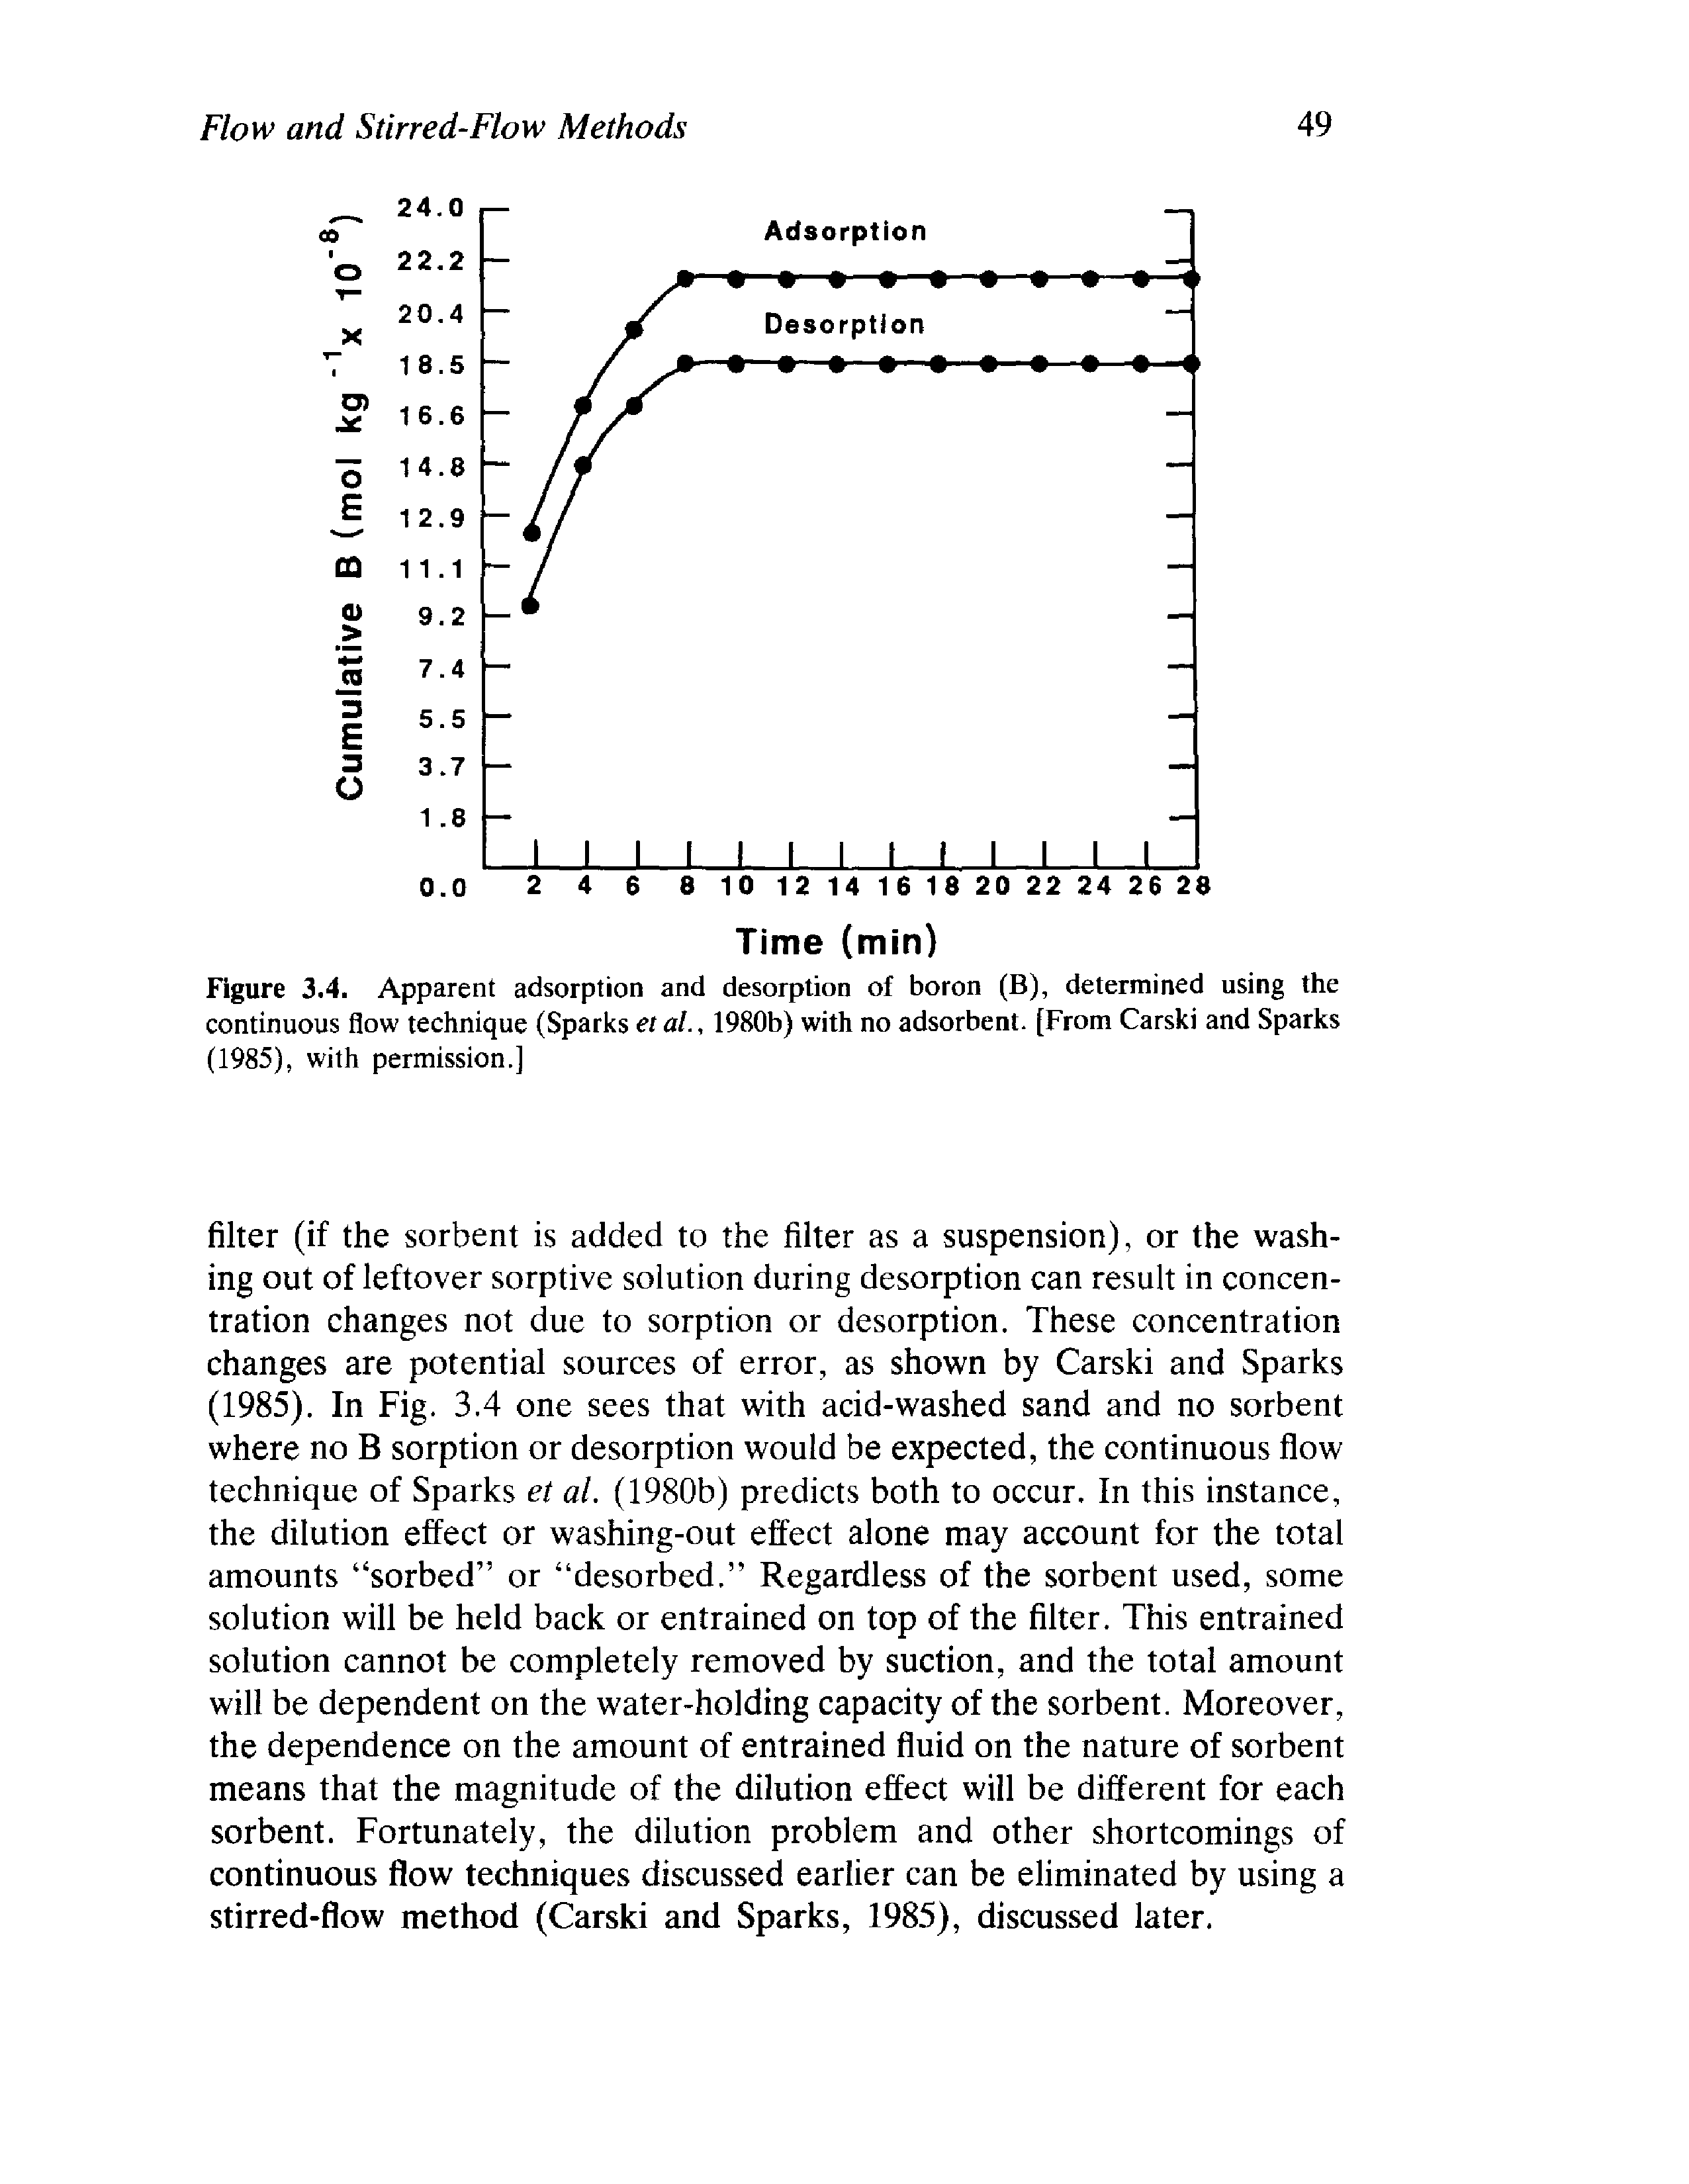 Figure 3.4. Apparent adsorption and desorption of boron (B), determined using the continuous flow technique (Sparks et at., 1980b) with no adsorbent. [From Carski and Sparks (1985), with permission.]...